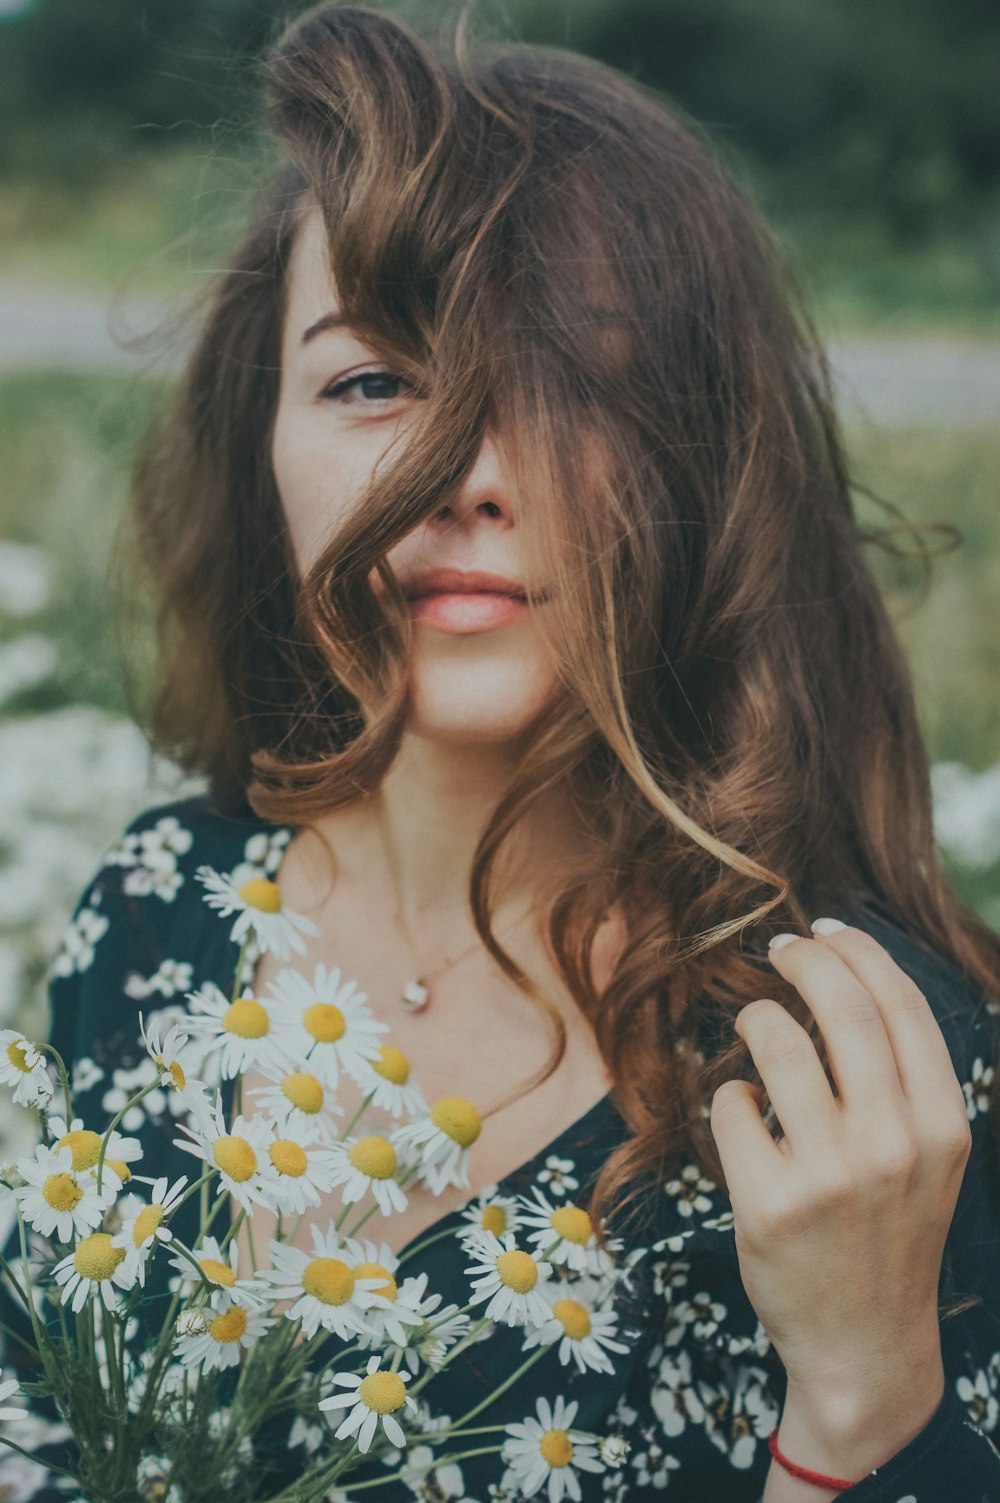 woman in black and yellow floral shirt holding her hair